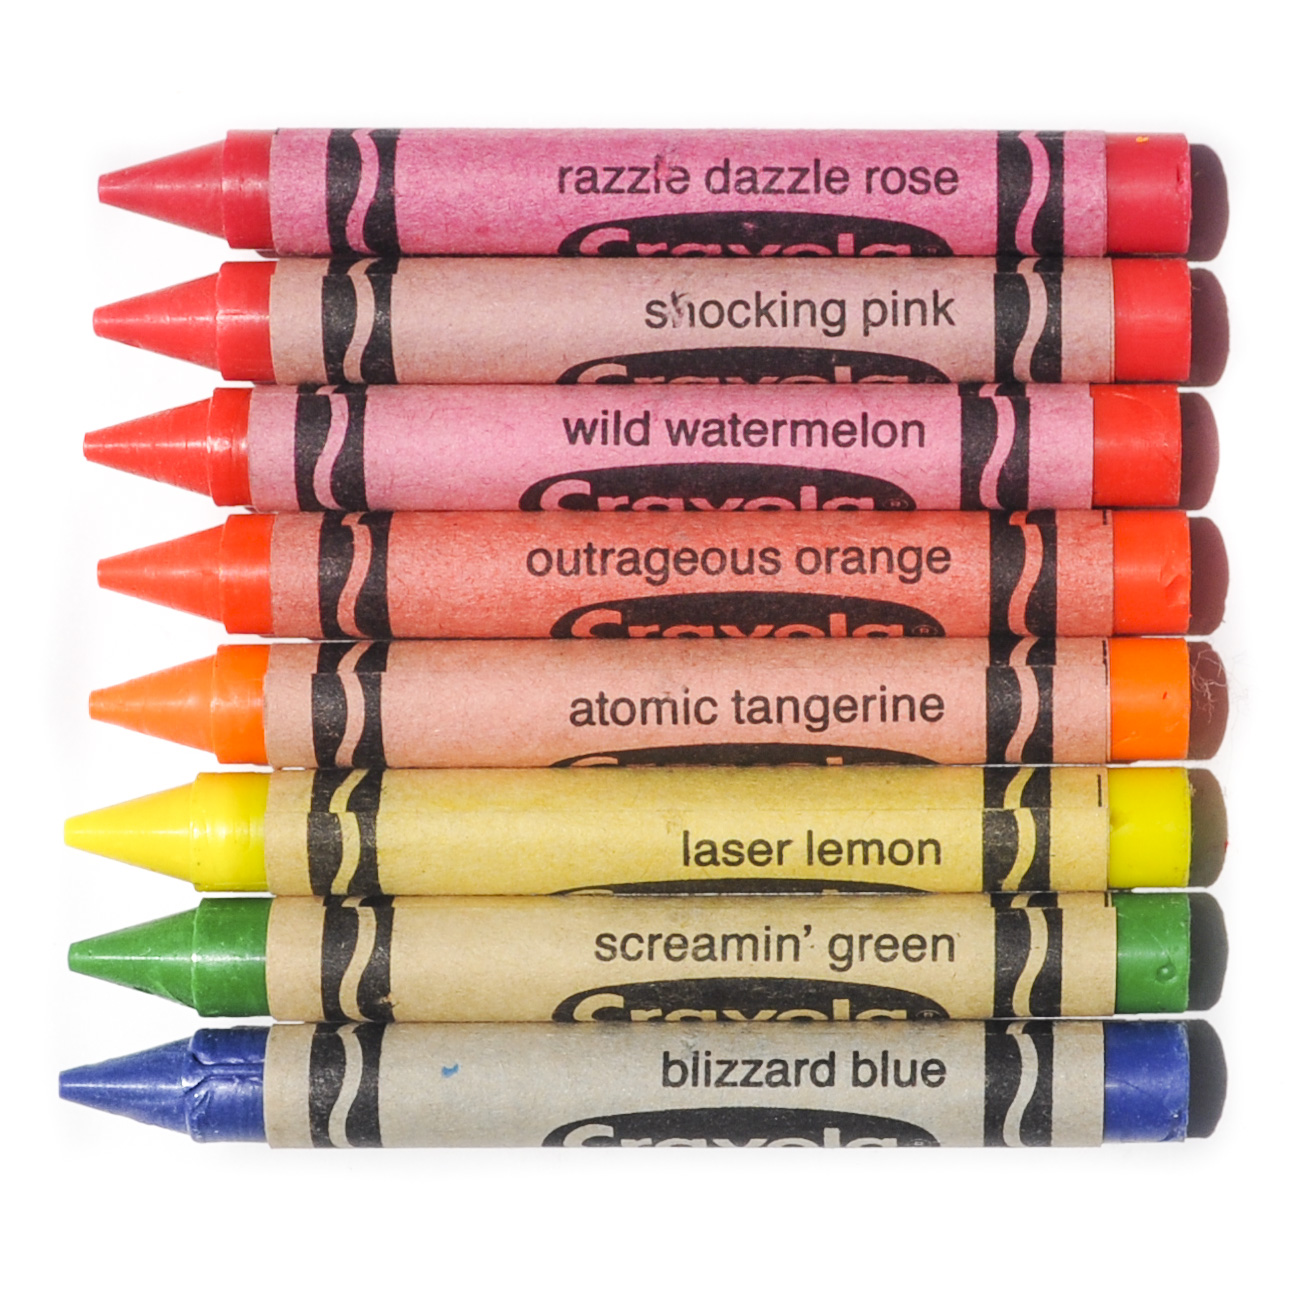 crayola-neon-crayons-what-s-inside-the-box-jenny-s-crayon-collection